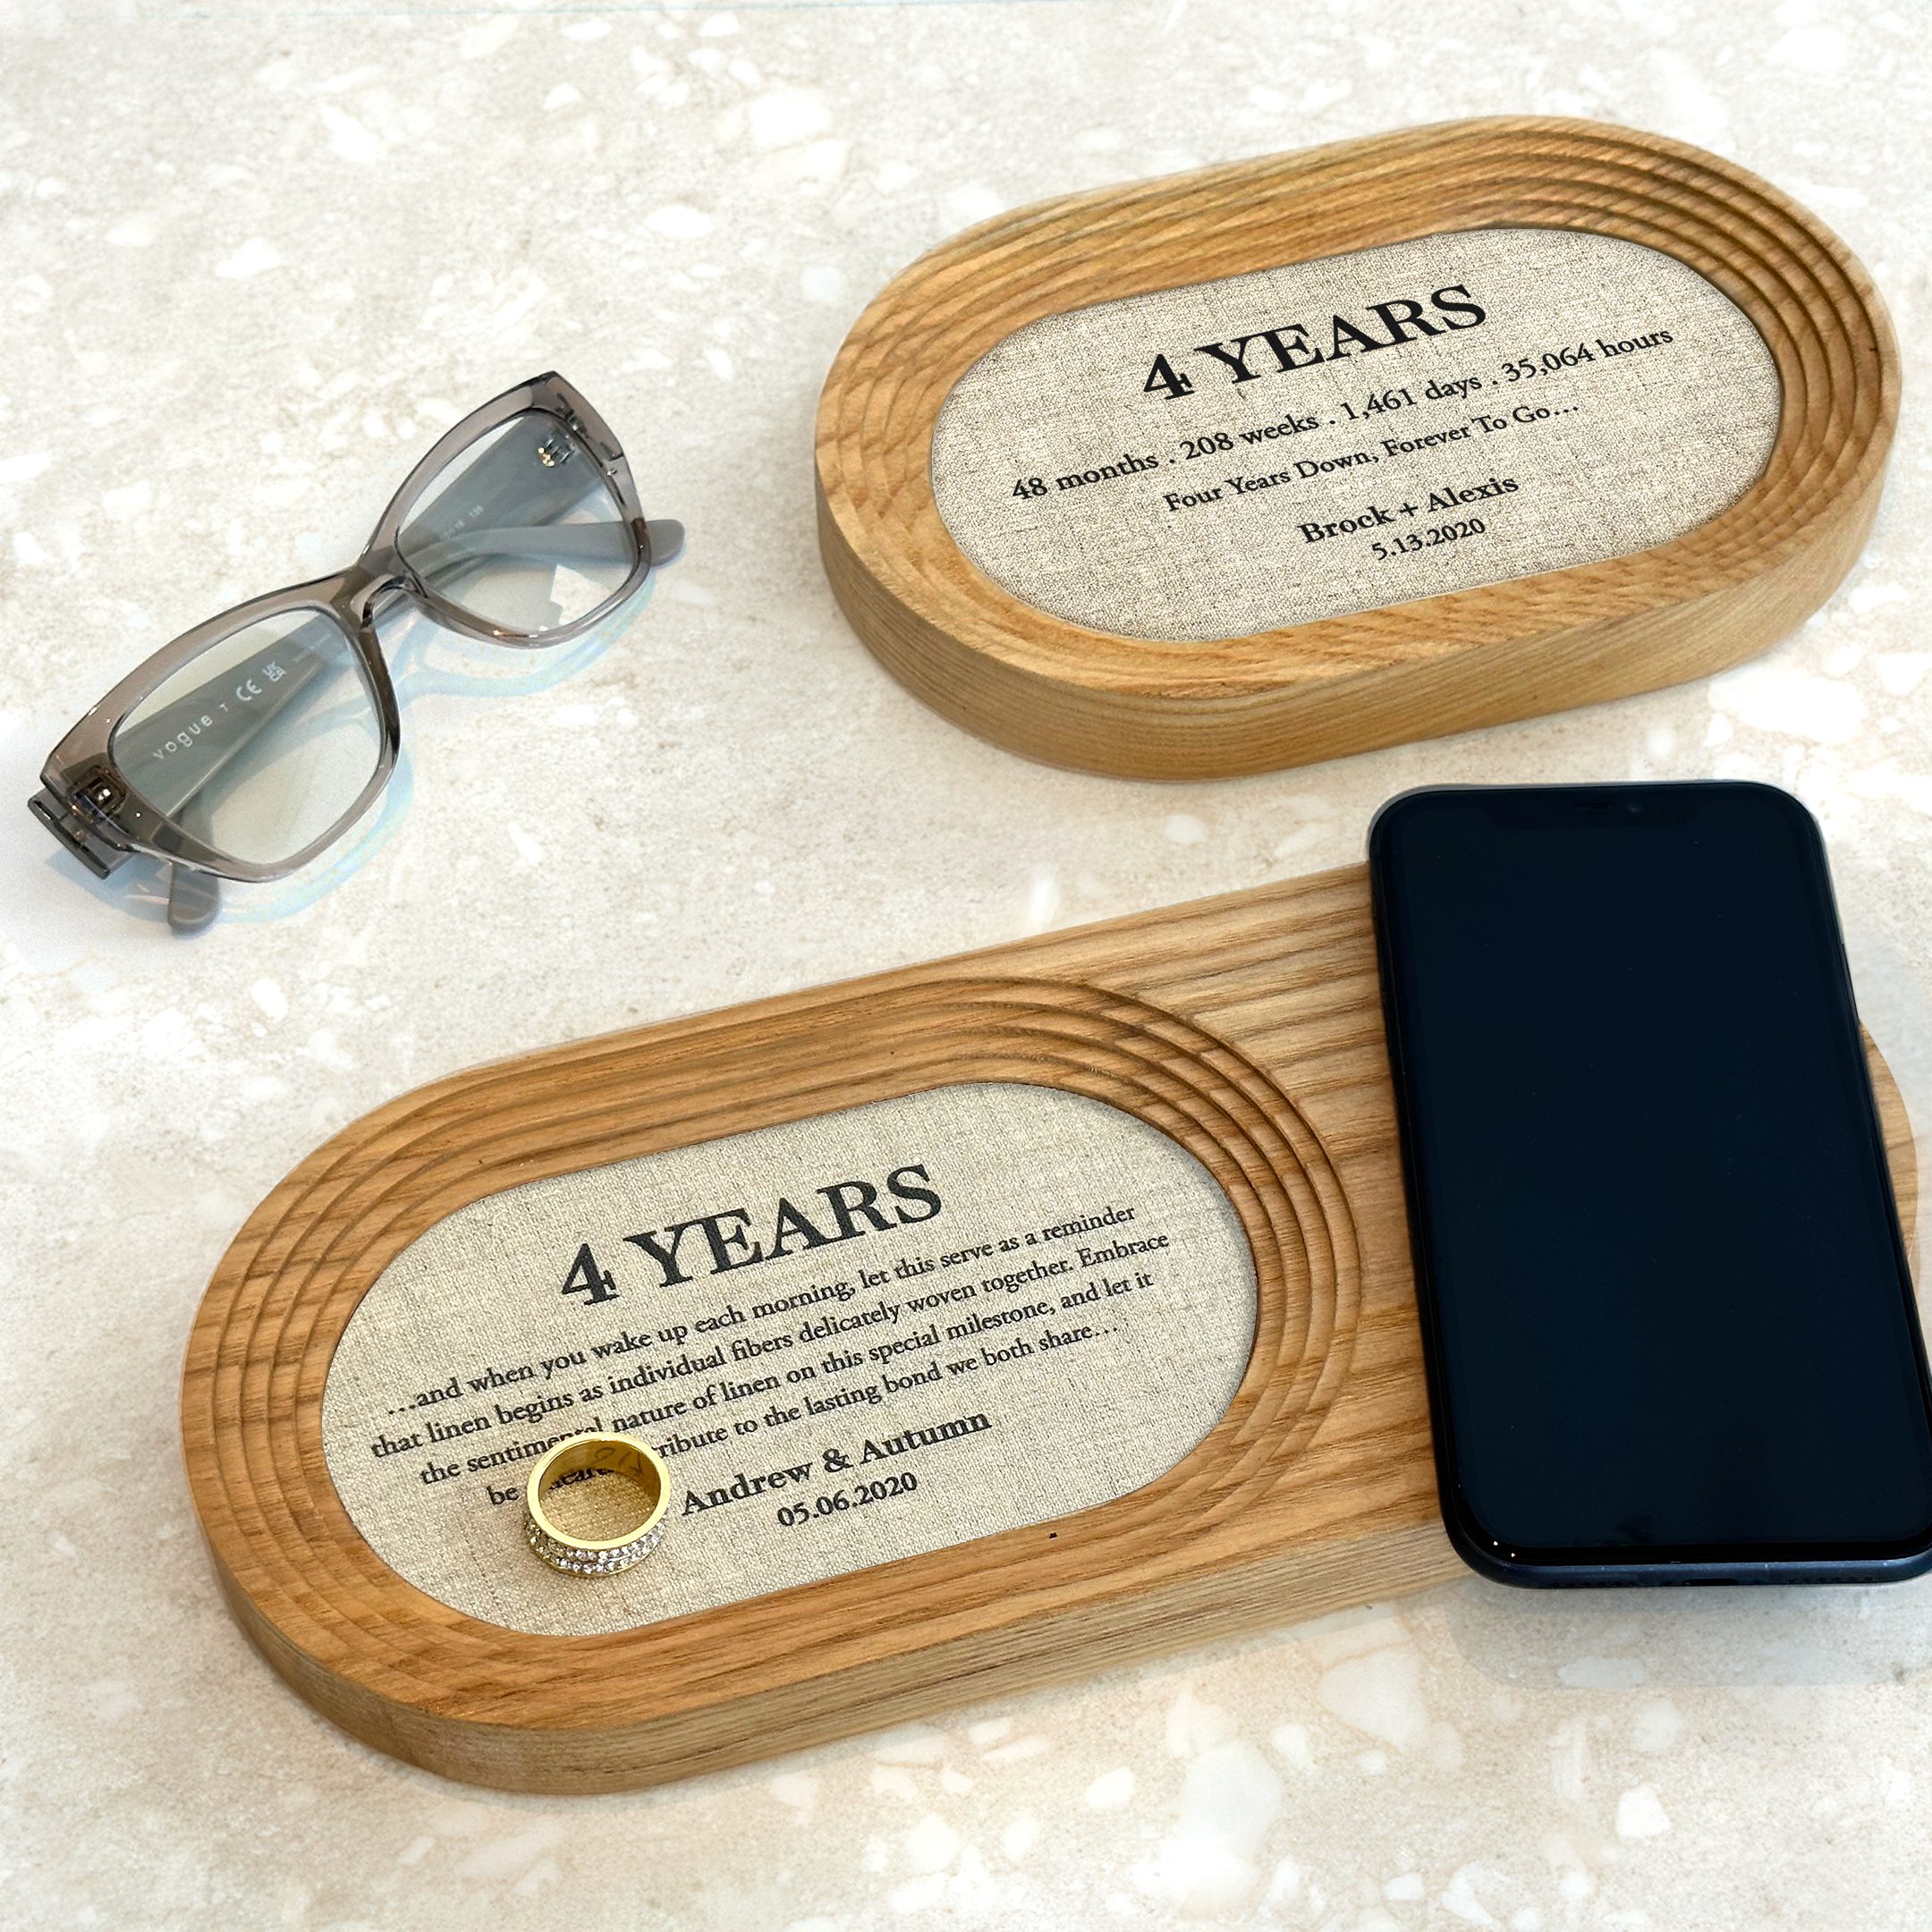 Customizable tray for 4th linen anniversary celebration - Use as key tray, ring dish or jewelry tray